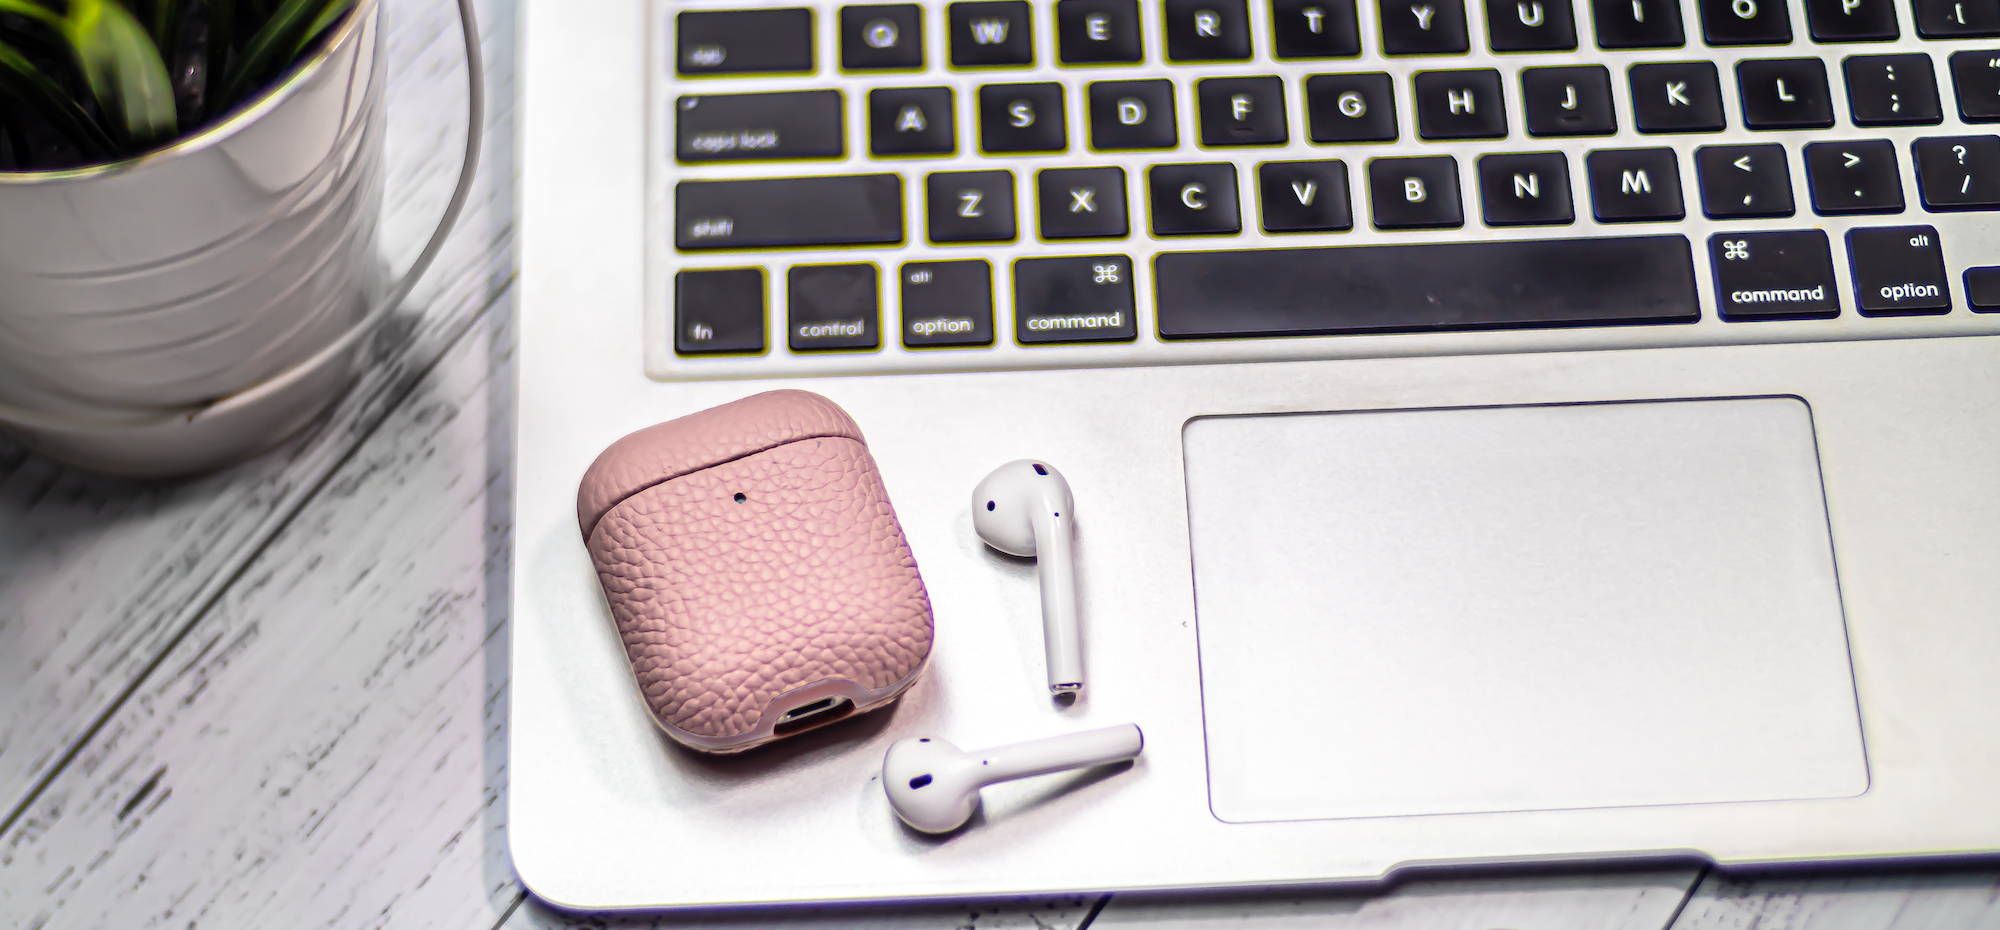 pink genuine leather airpods leather case laying on a silver macbook air and grey wooden table top